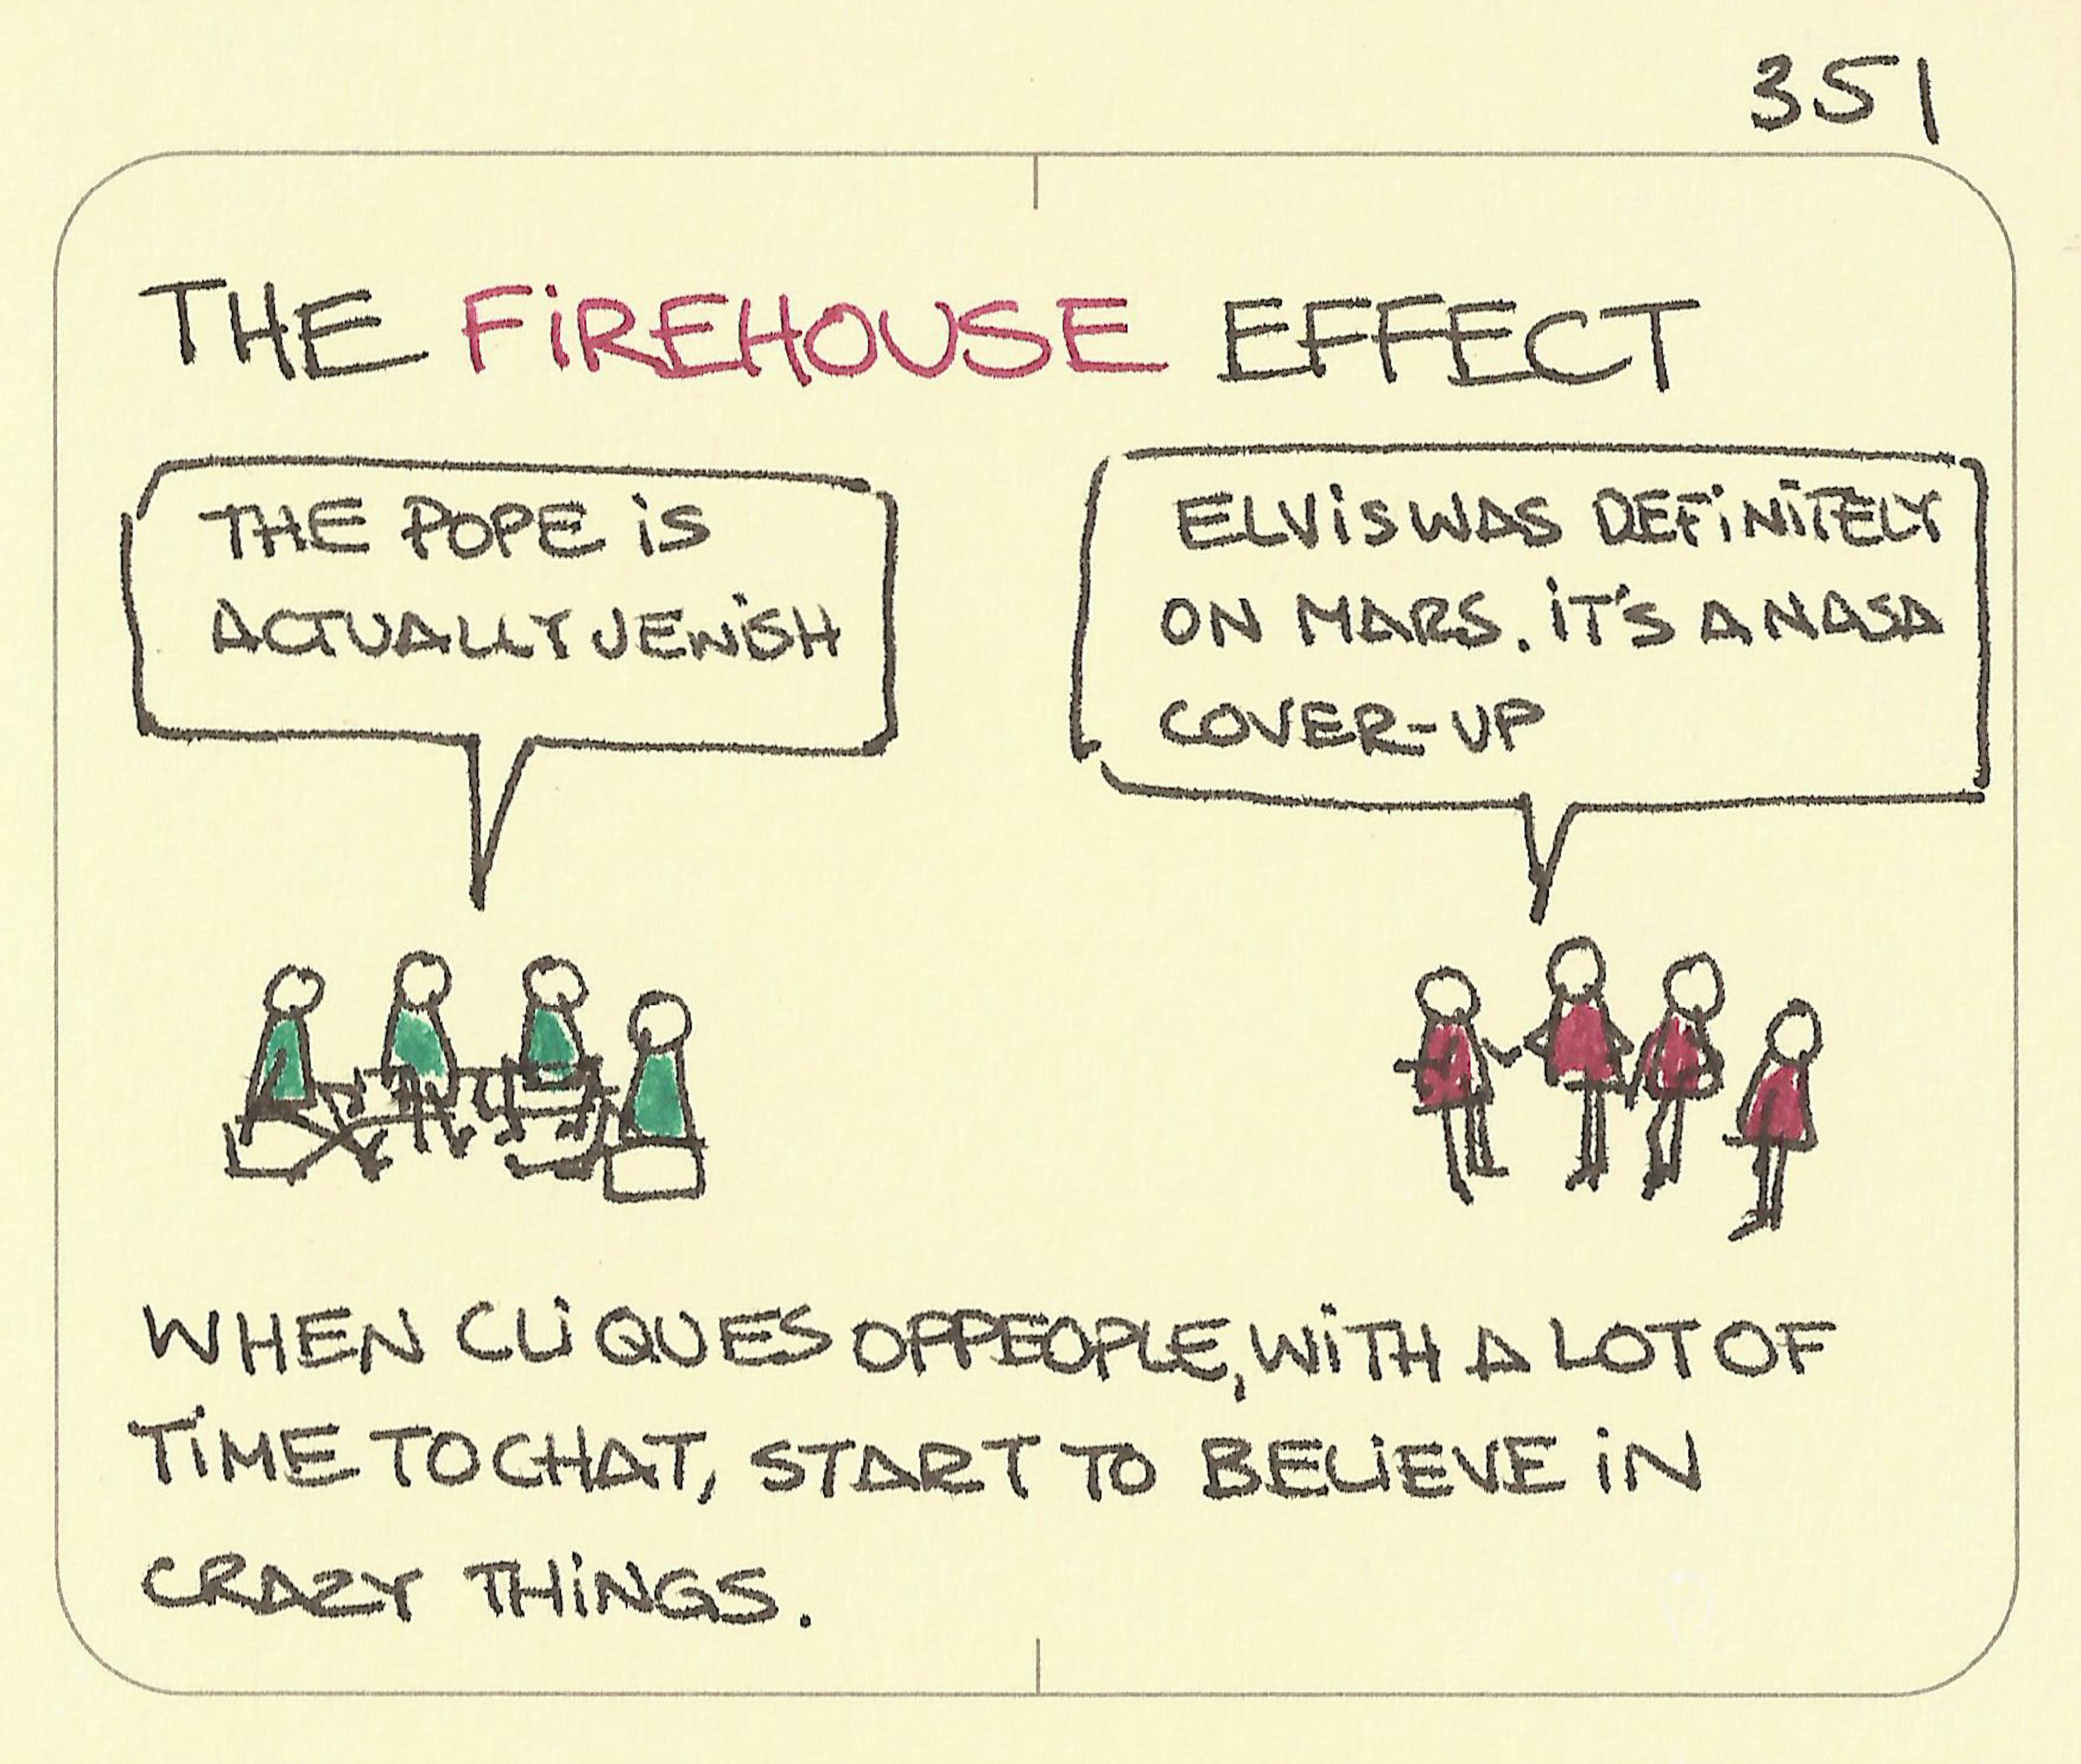 The Barnum effect - Sketchplanations